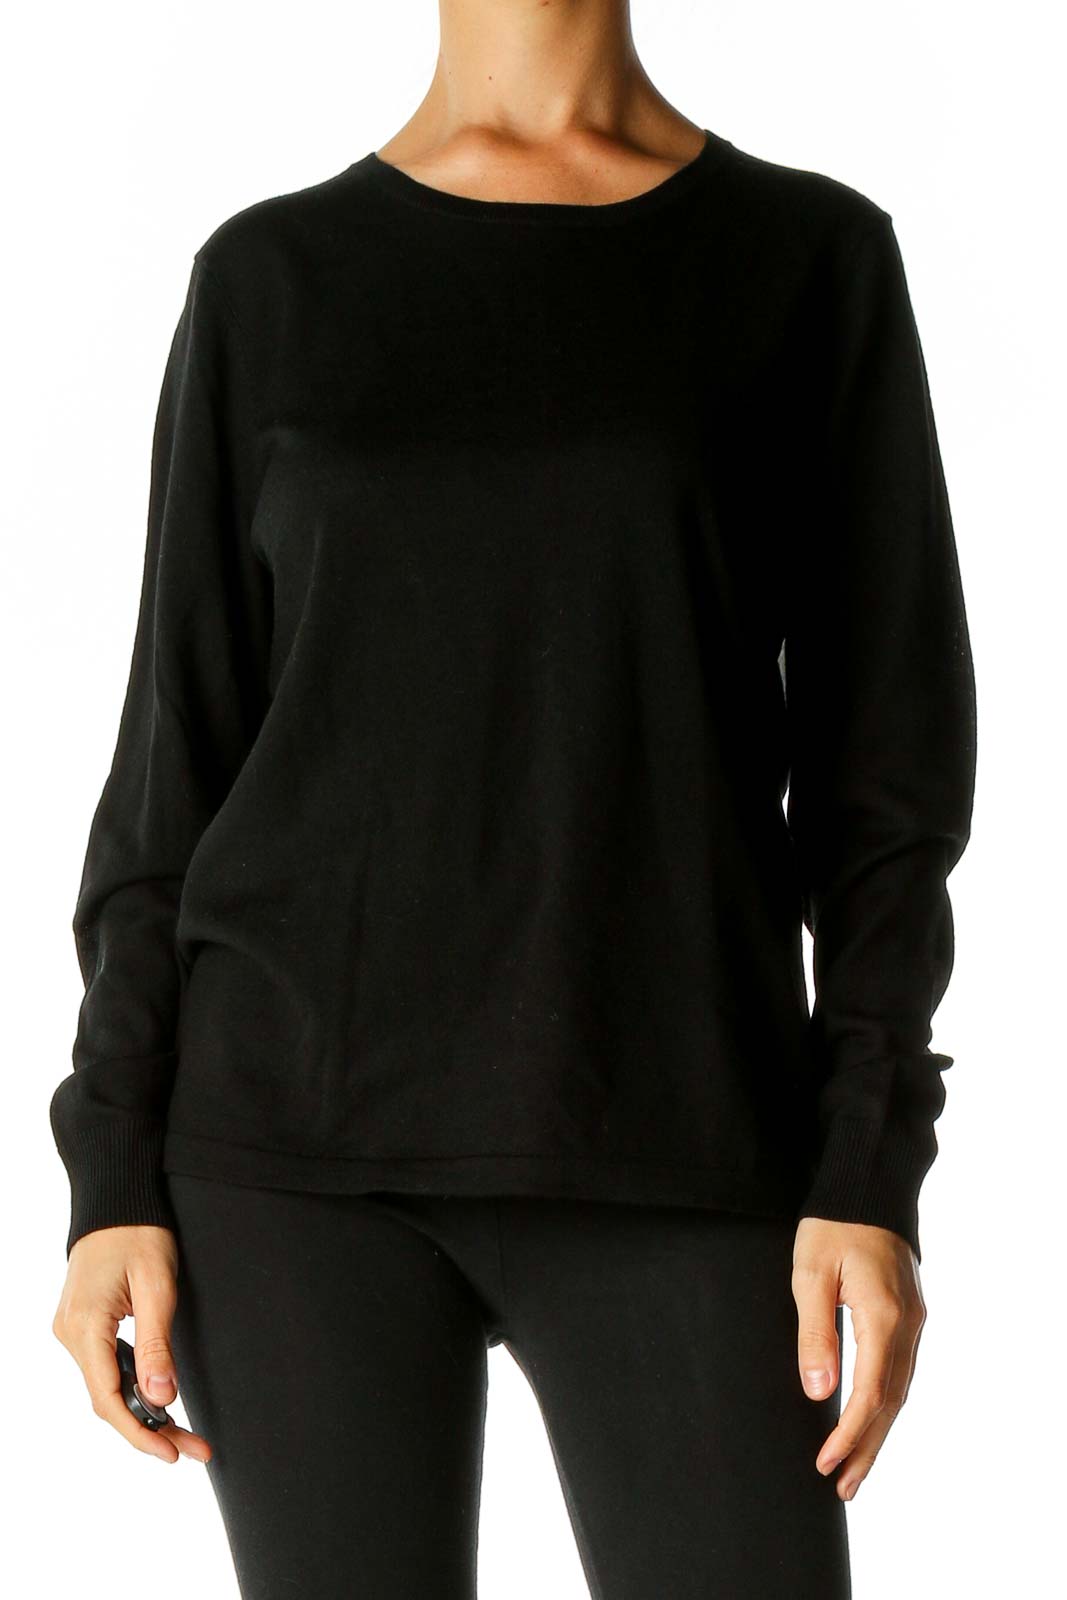 Black Solid Casual Sweater Front